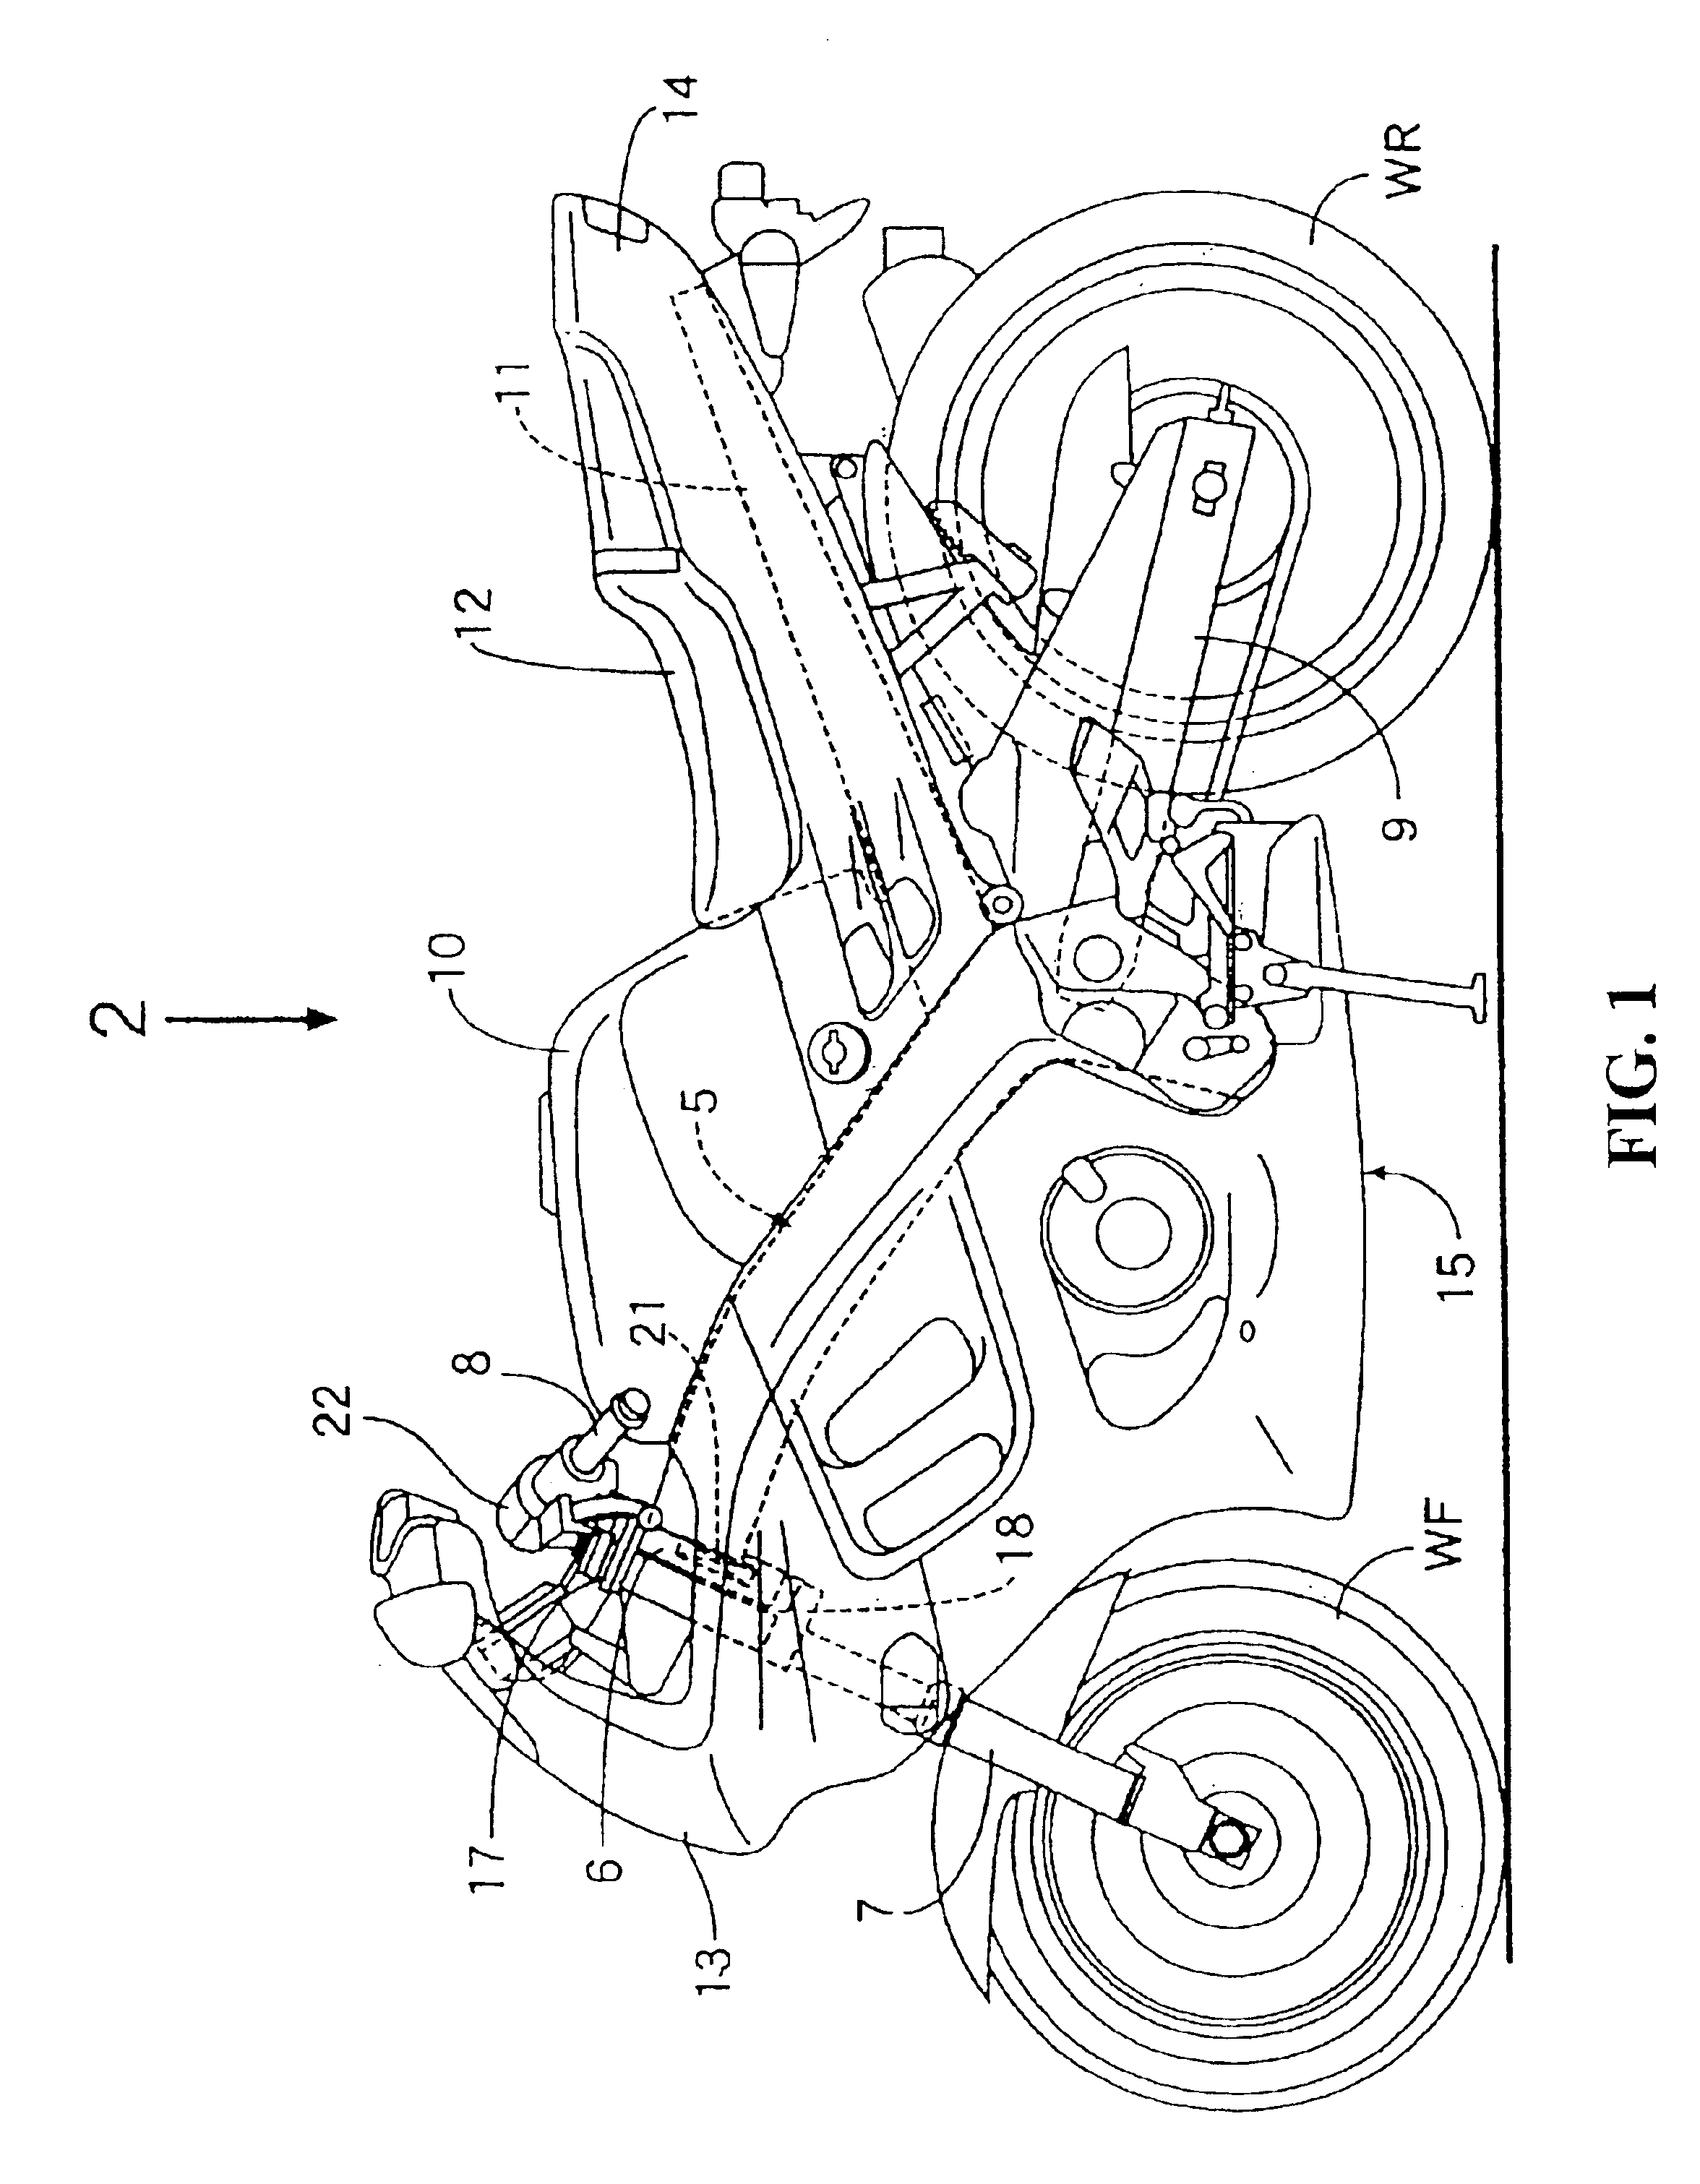 Airbag apparatus for a compact vehicle